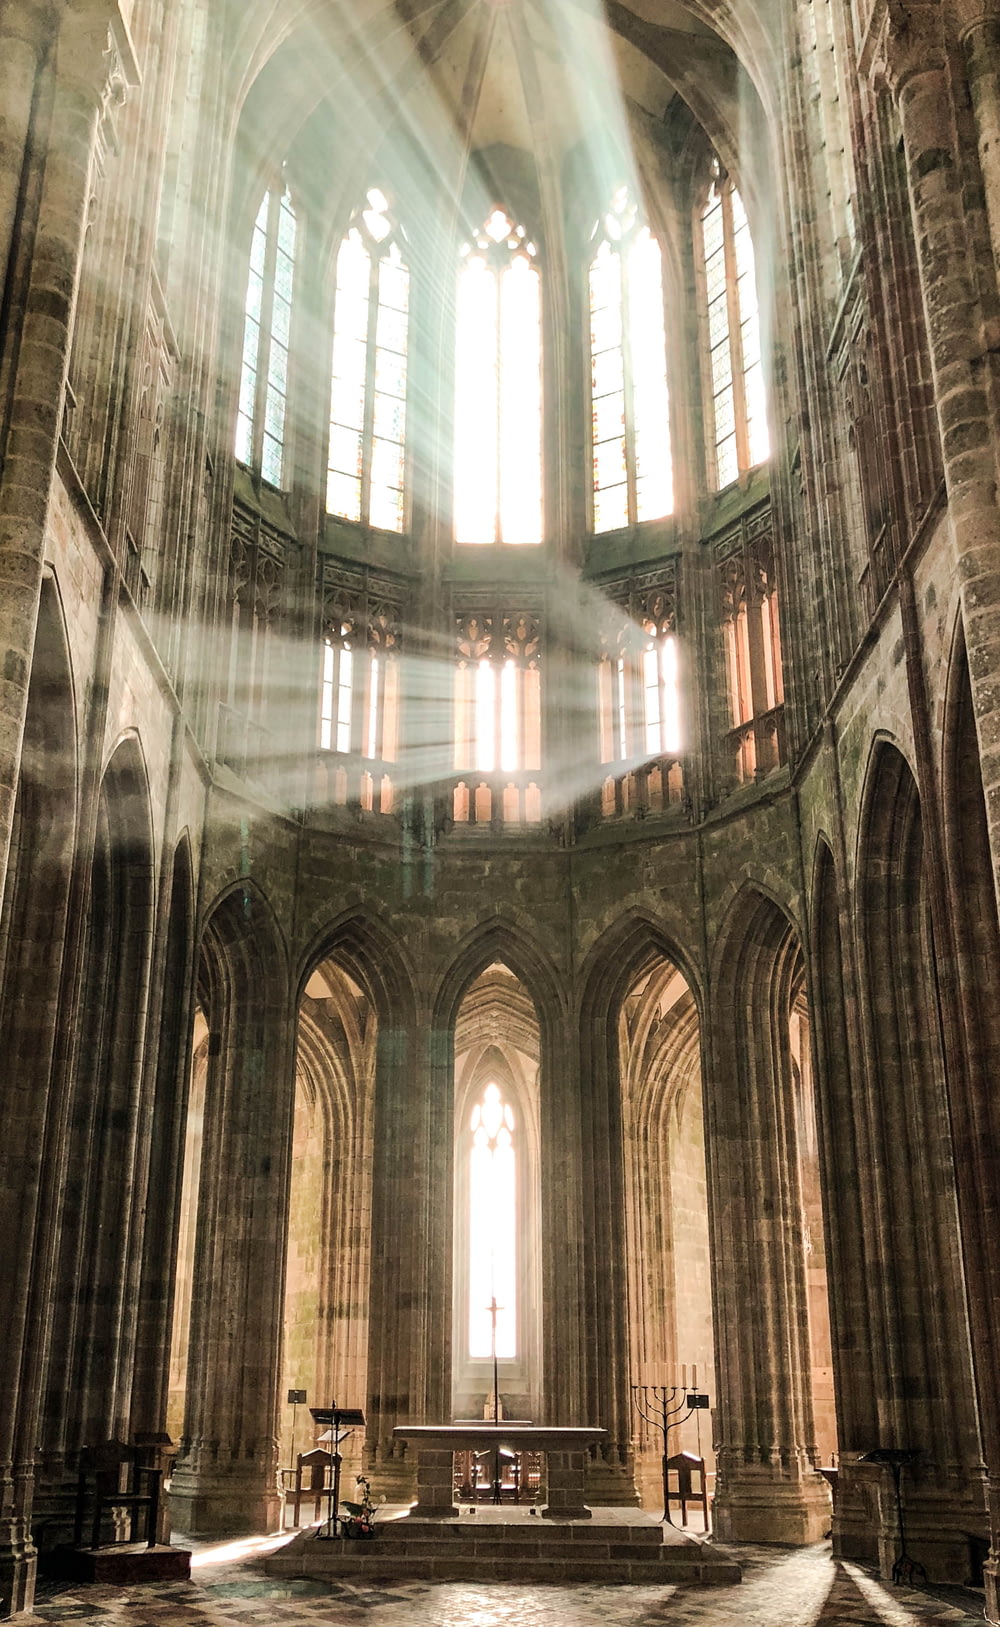 sunlight streams through the windows of a cathedral